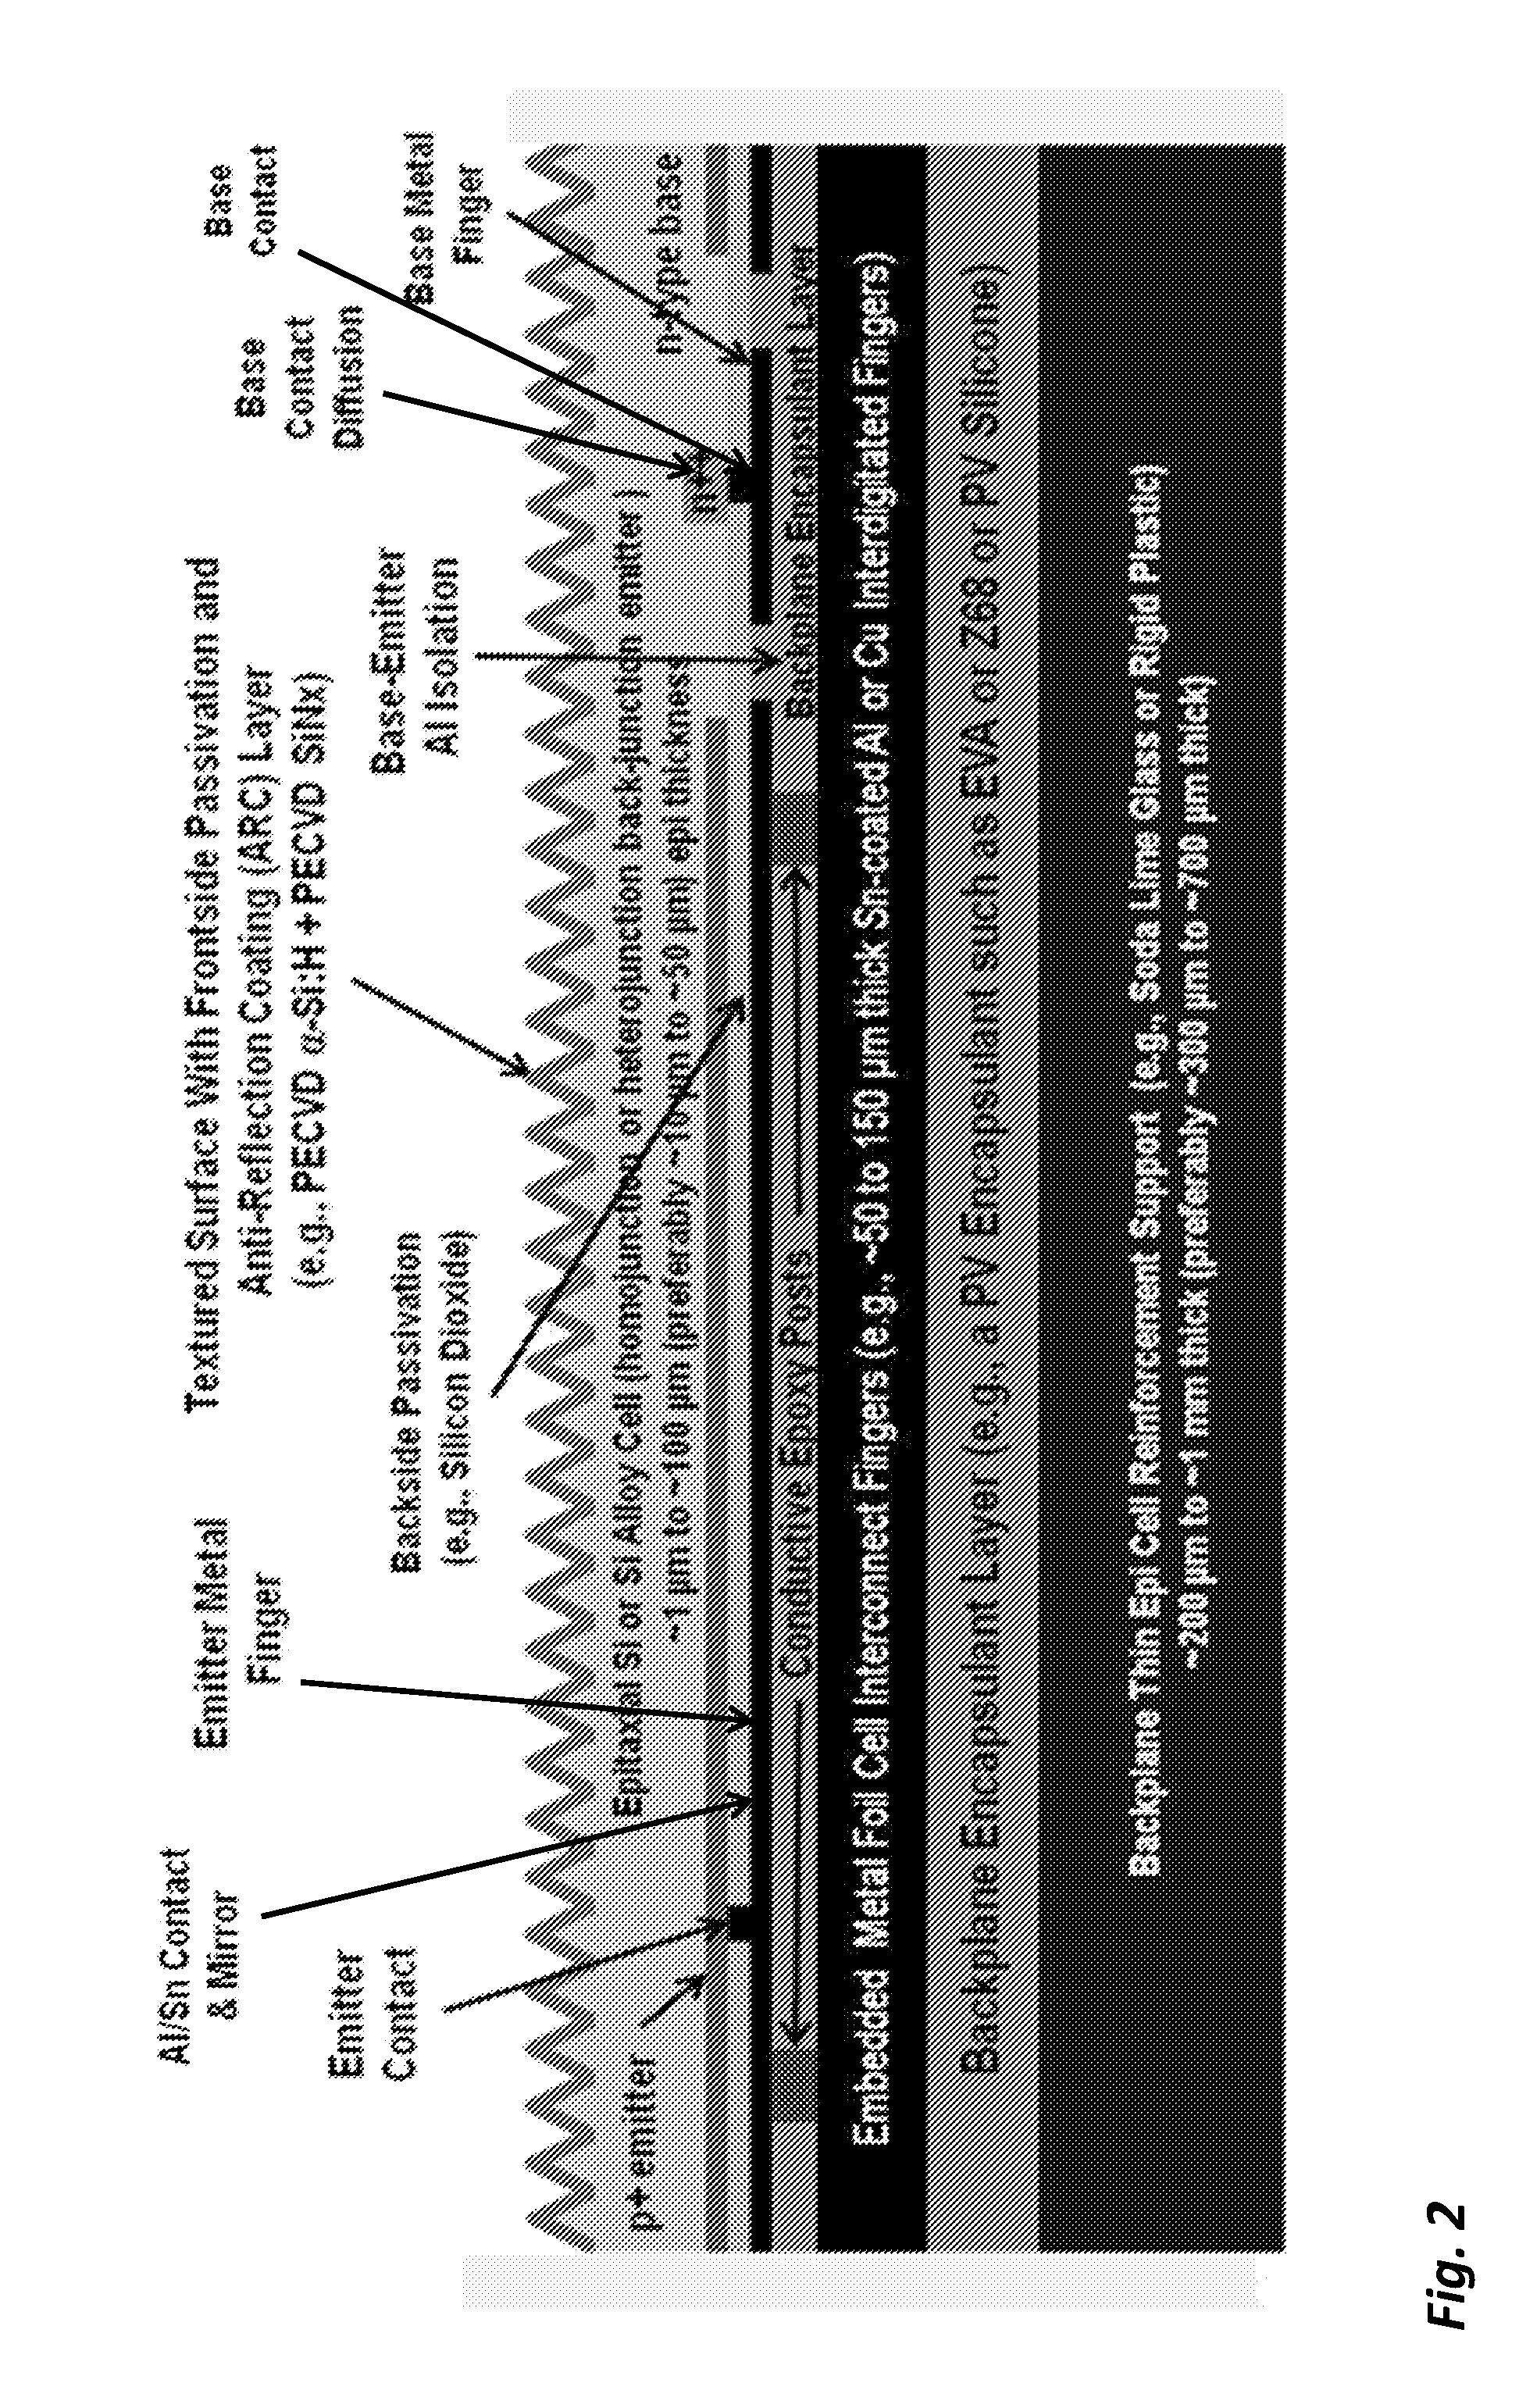 High efficiency solar cell structures and manufacturing methods